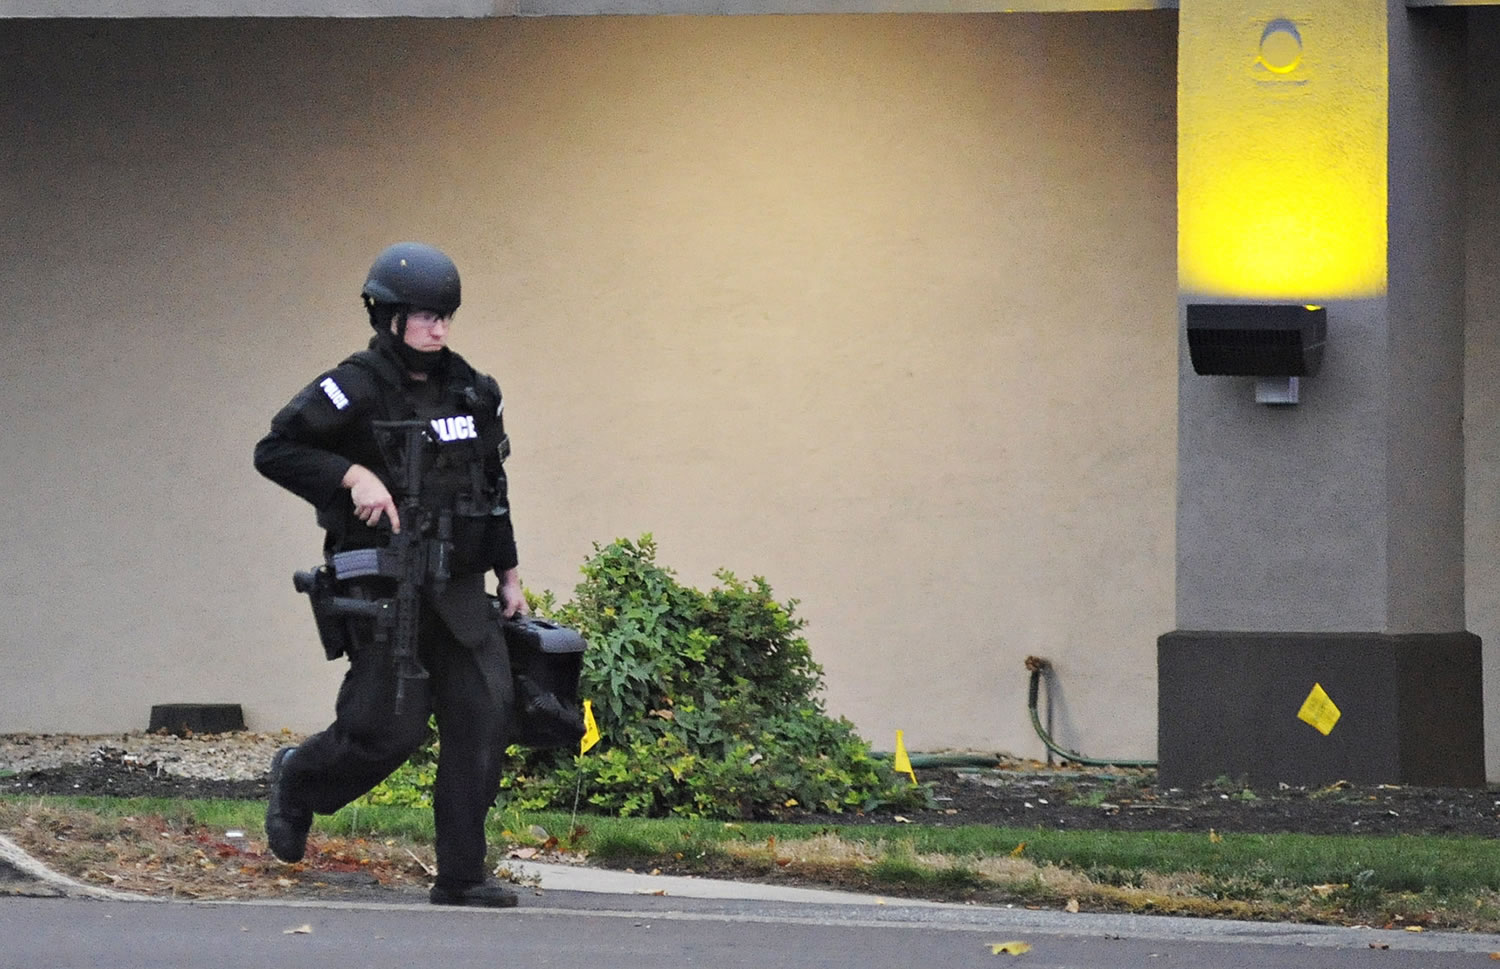 A police officer walks in front of the Knights Inn after reports of a shooting at the motel in Bensalem Township, near Trevose, Pa., on Saturday. Police seeking someone on a parole violation stumbled upon another man and a woman who were wanted in a double homicide in North Carolina. That man apparently killed himself at the motel after firing at police, authorities said Saturday.